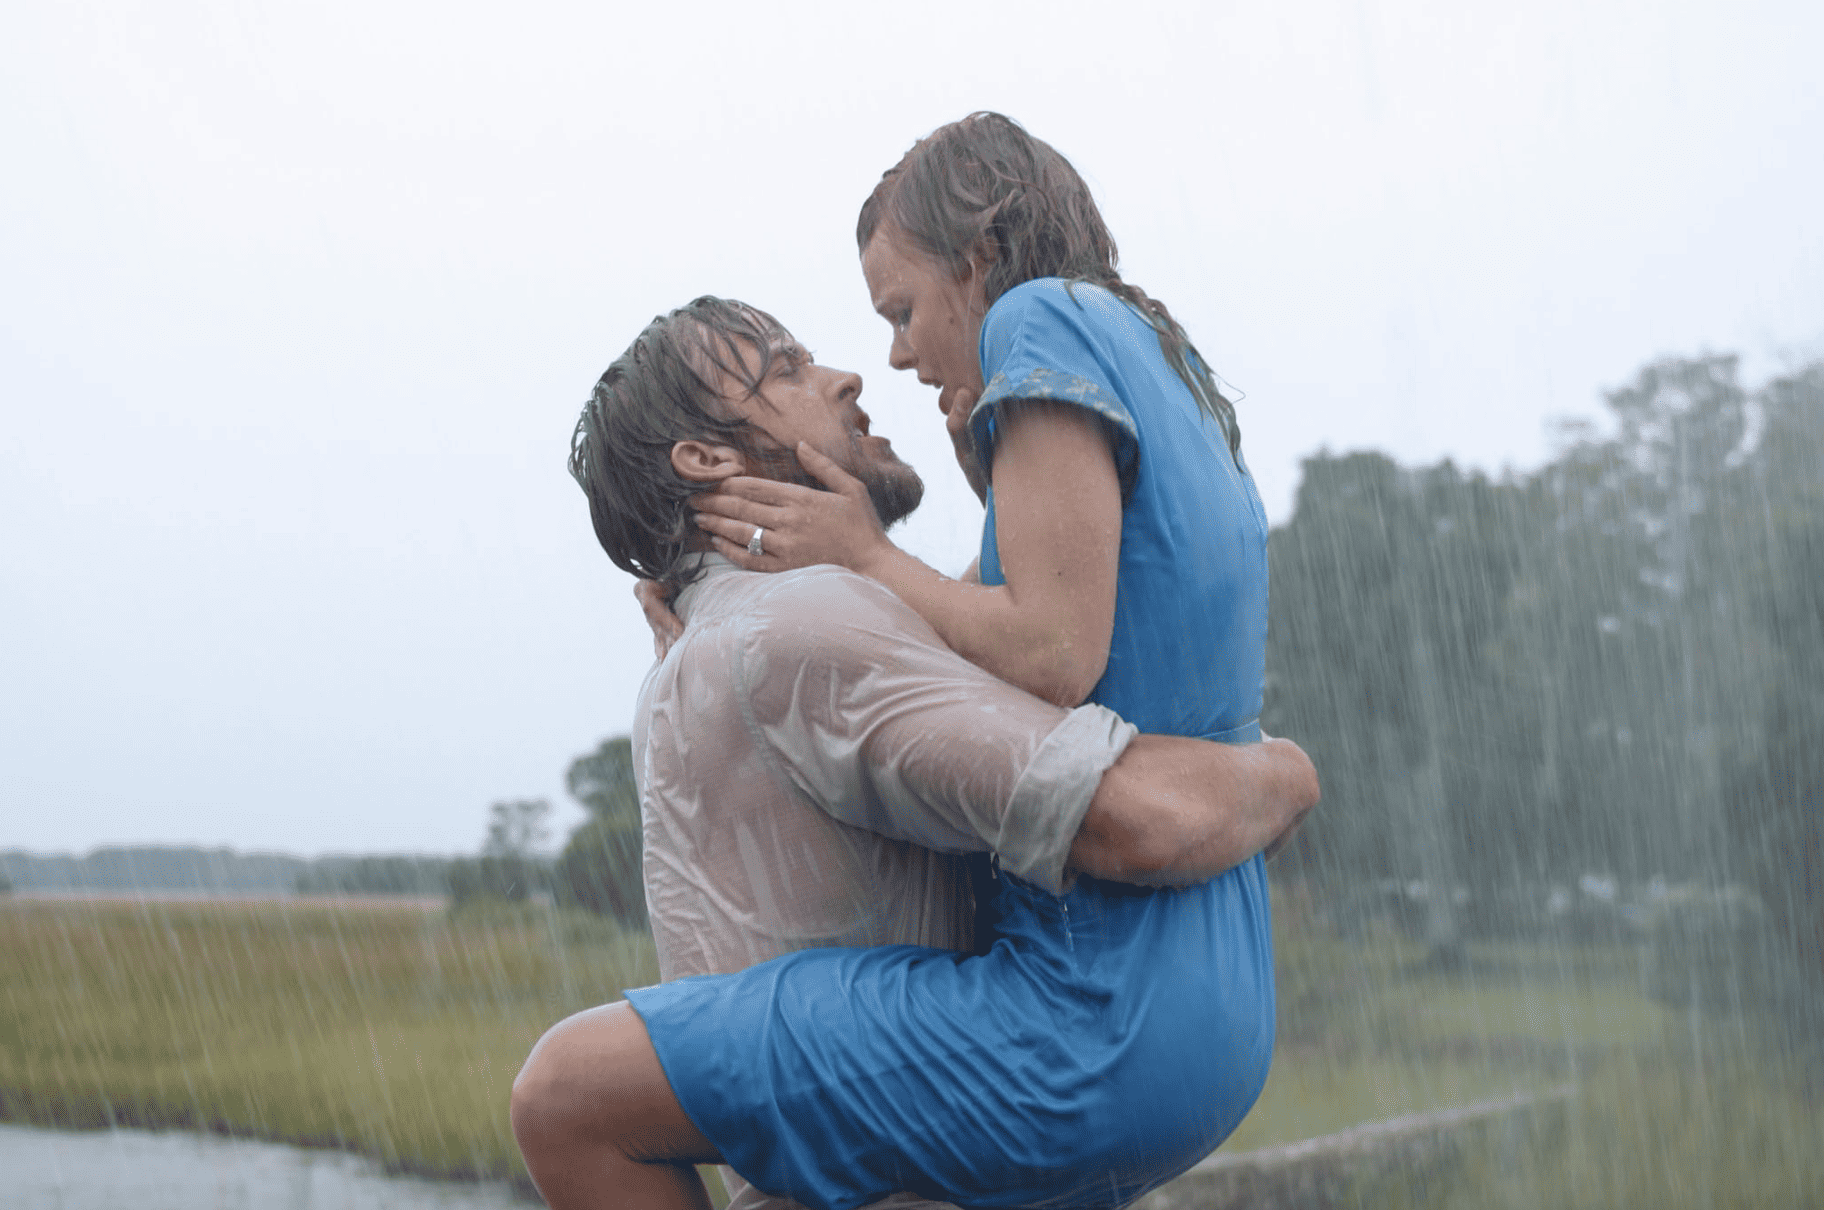  A man holds up a woman in the rain in this image from New Line Cinema.